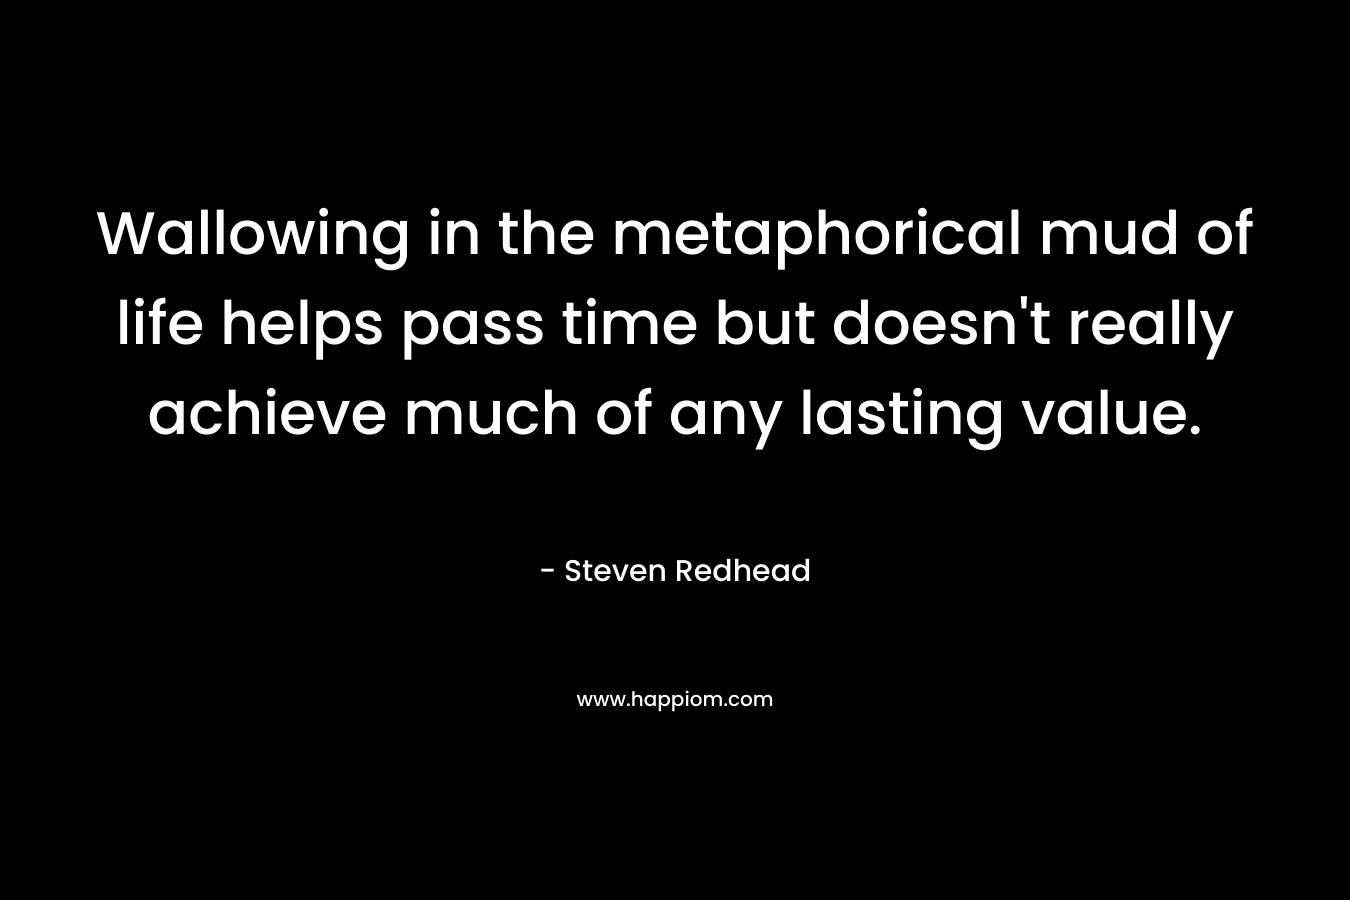 Wallowing in the metaphorical mud of life helps pass time but doesn't really achieve much of any lasting value.